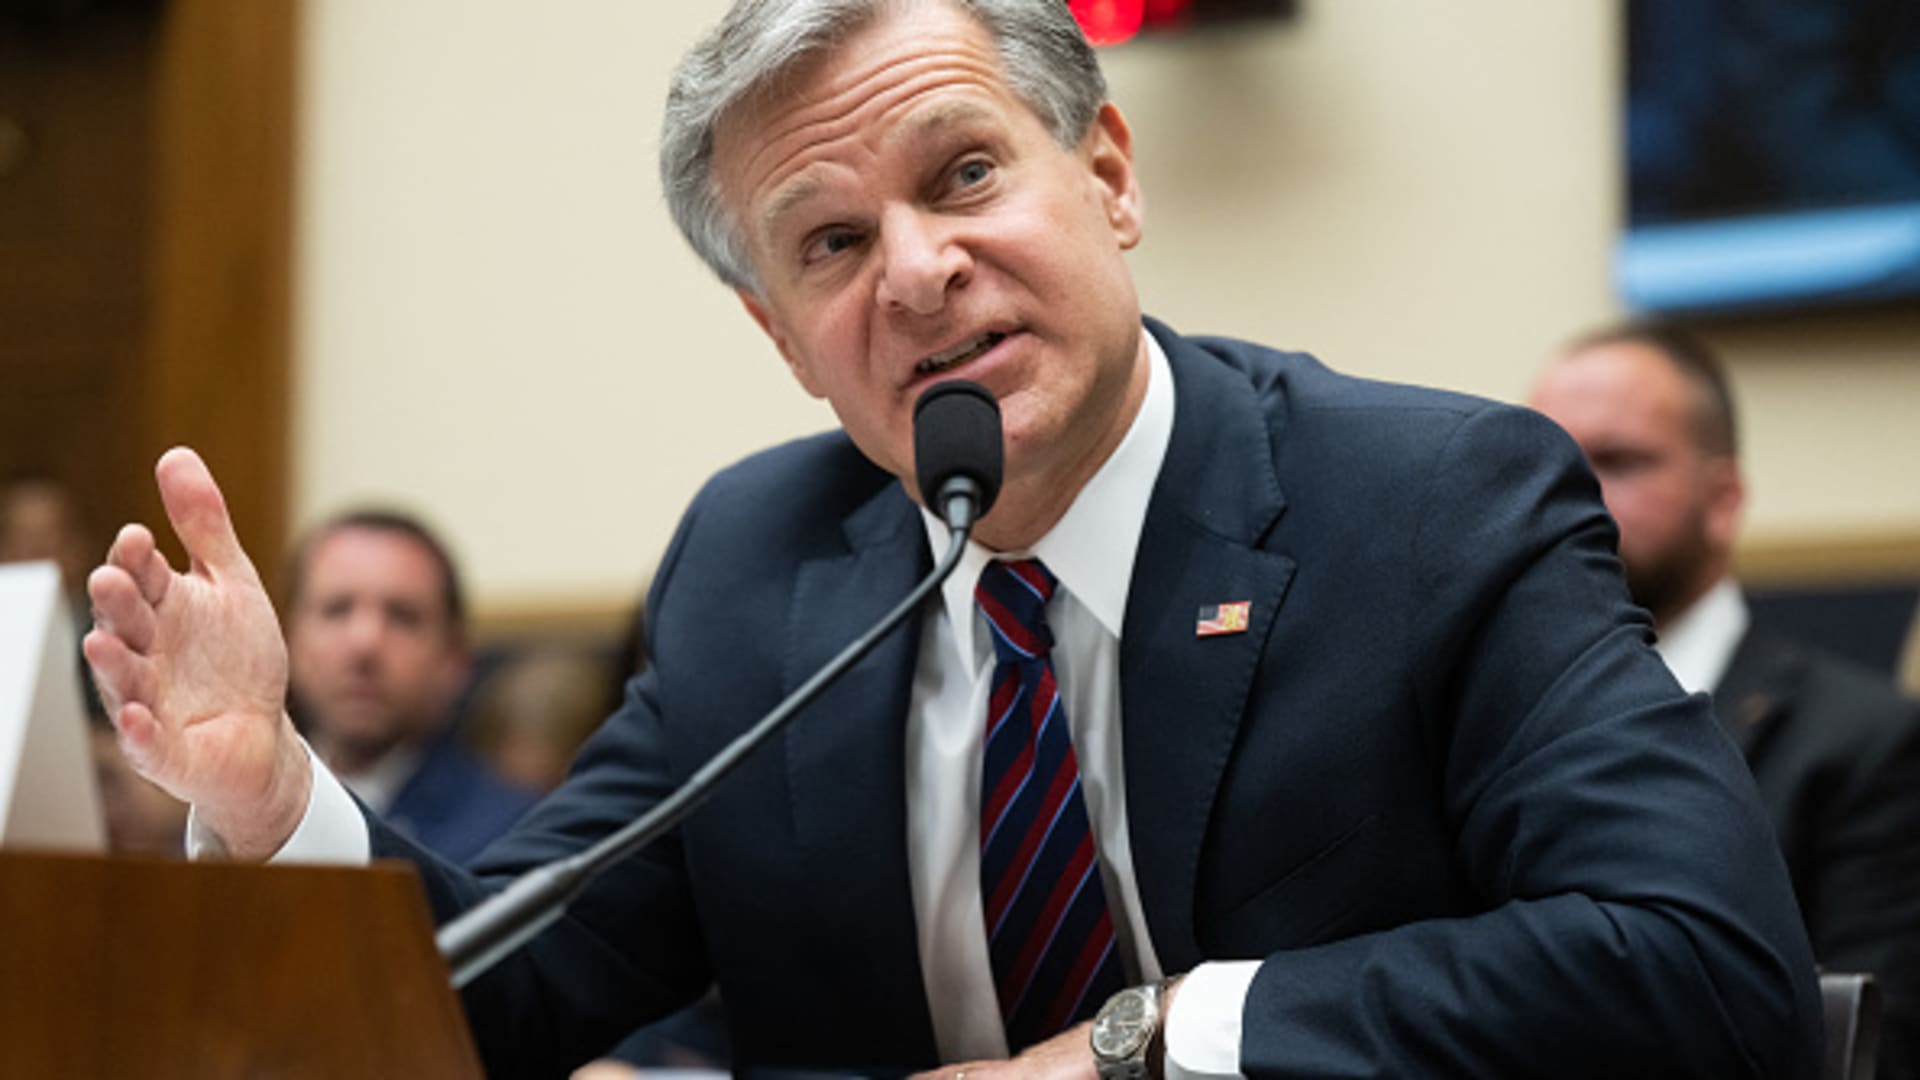 Communist Event cells influencing U.S. corporations’ China operations, FBI Director Wray says